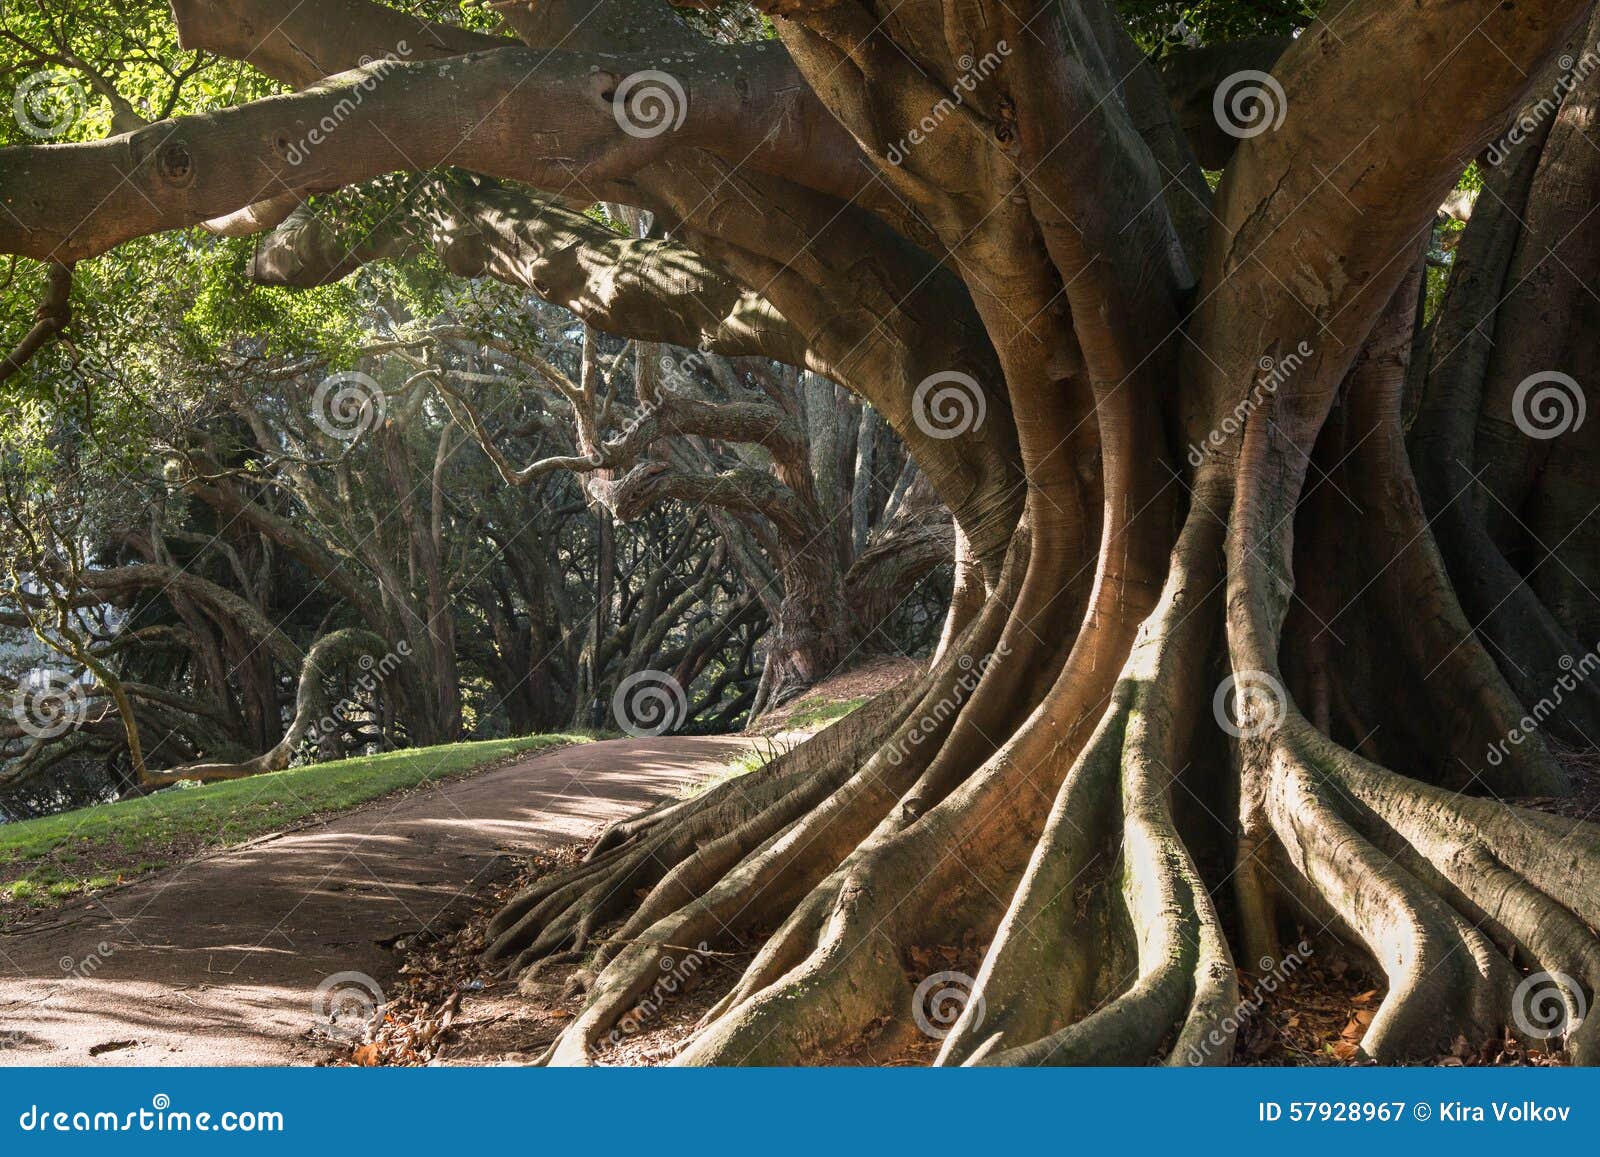 buttress roots of moreton bay fig tree